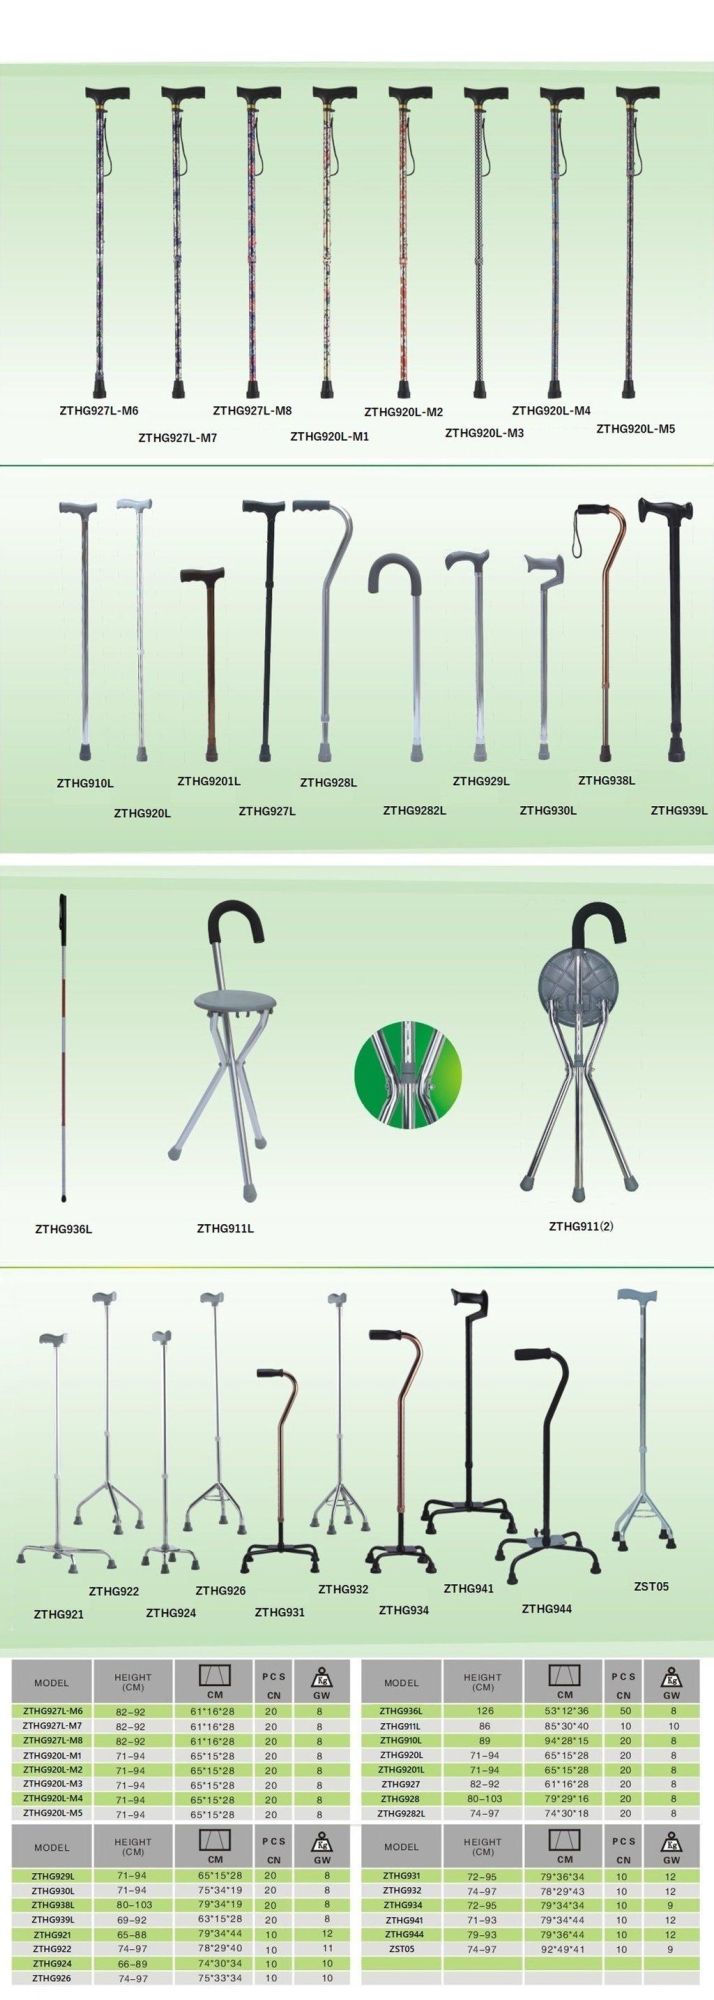 Four Legs Offset Handle Quad Cane Colorful Lightweight Adjustable Height Strong Safety Walking Stick for Disabled/Elderly People Outdoor Aluminum Product